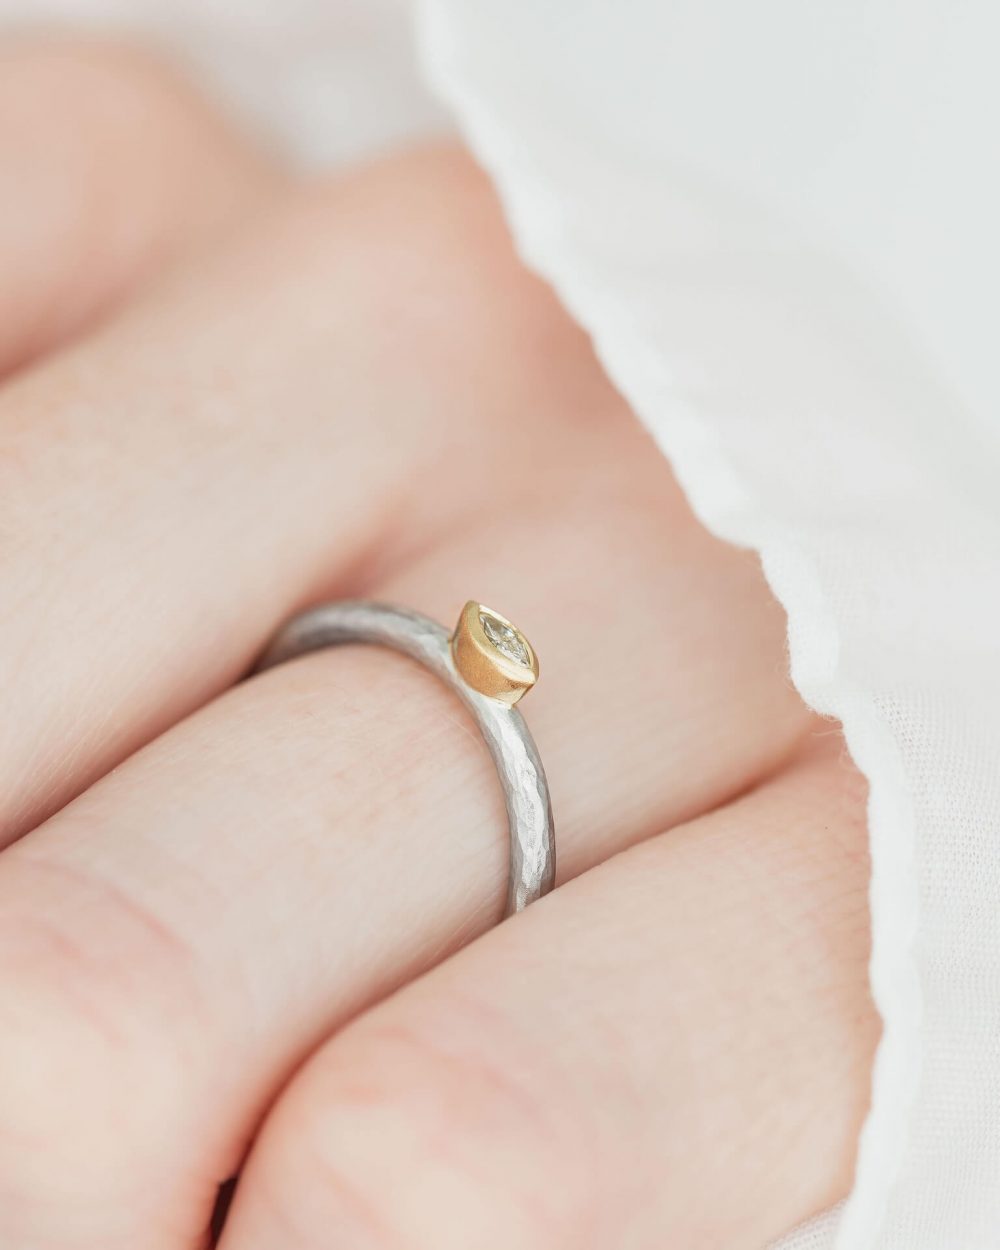 Marquise Diamond Ring Handmade In Hammered Textured Platinum, With A Yellow Gold Setting. Pictured On Model, Side View. Engagement Ring Designed By Jacks Turner Bristol Jeweller.